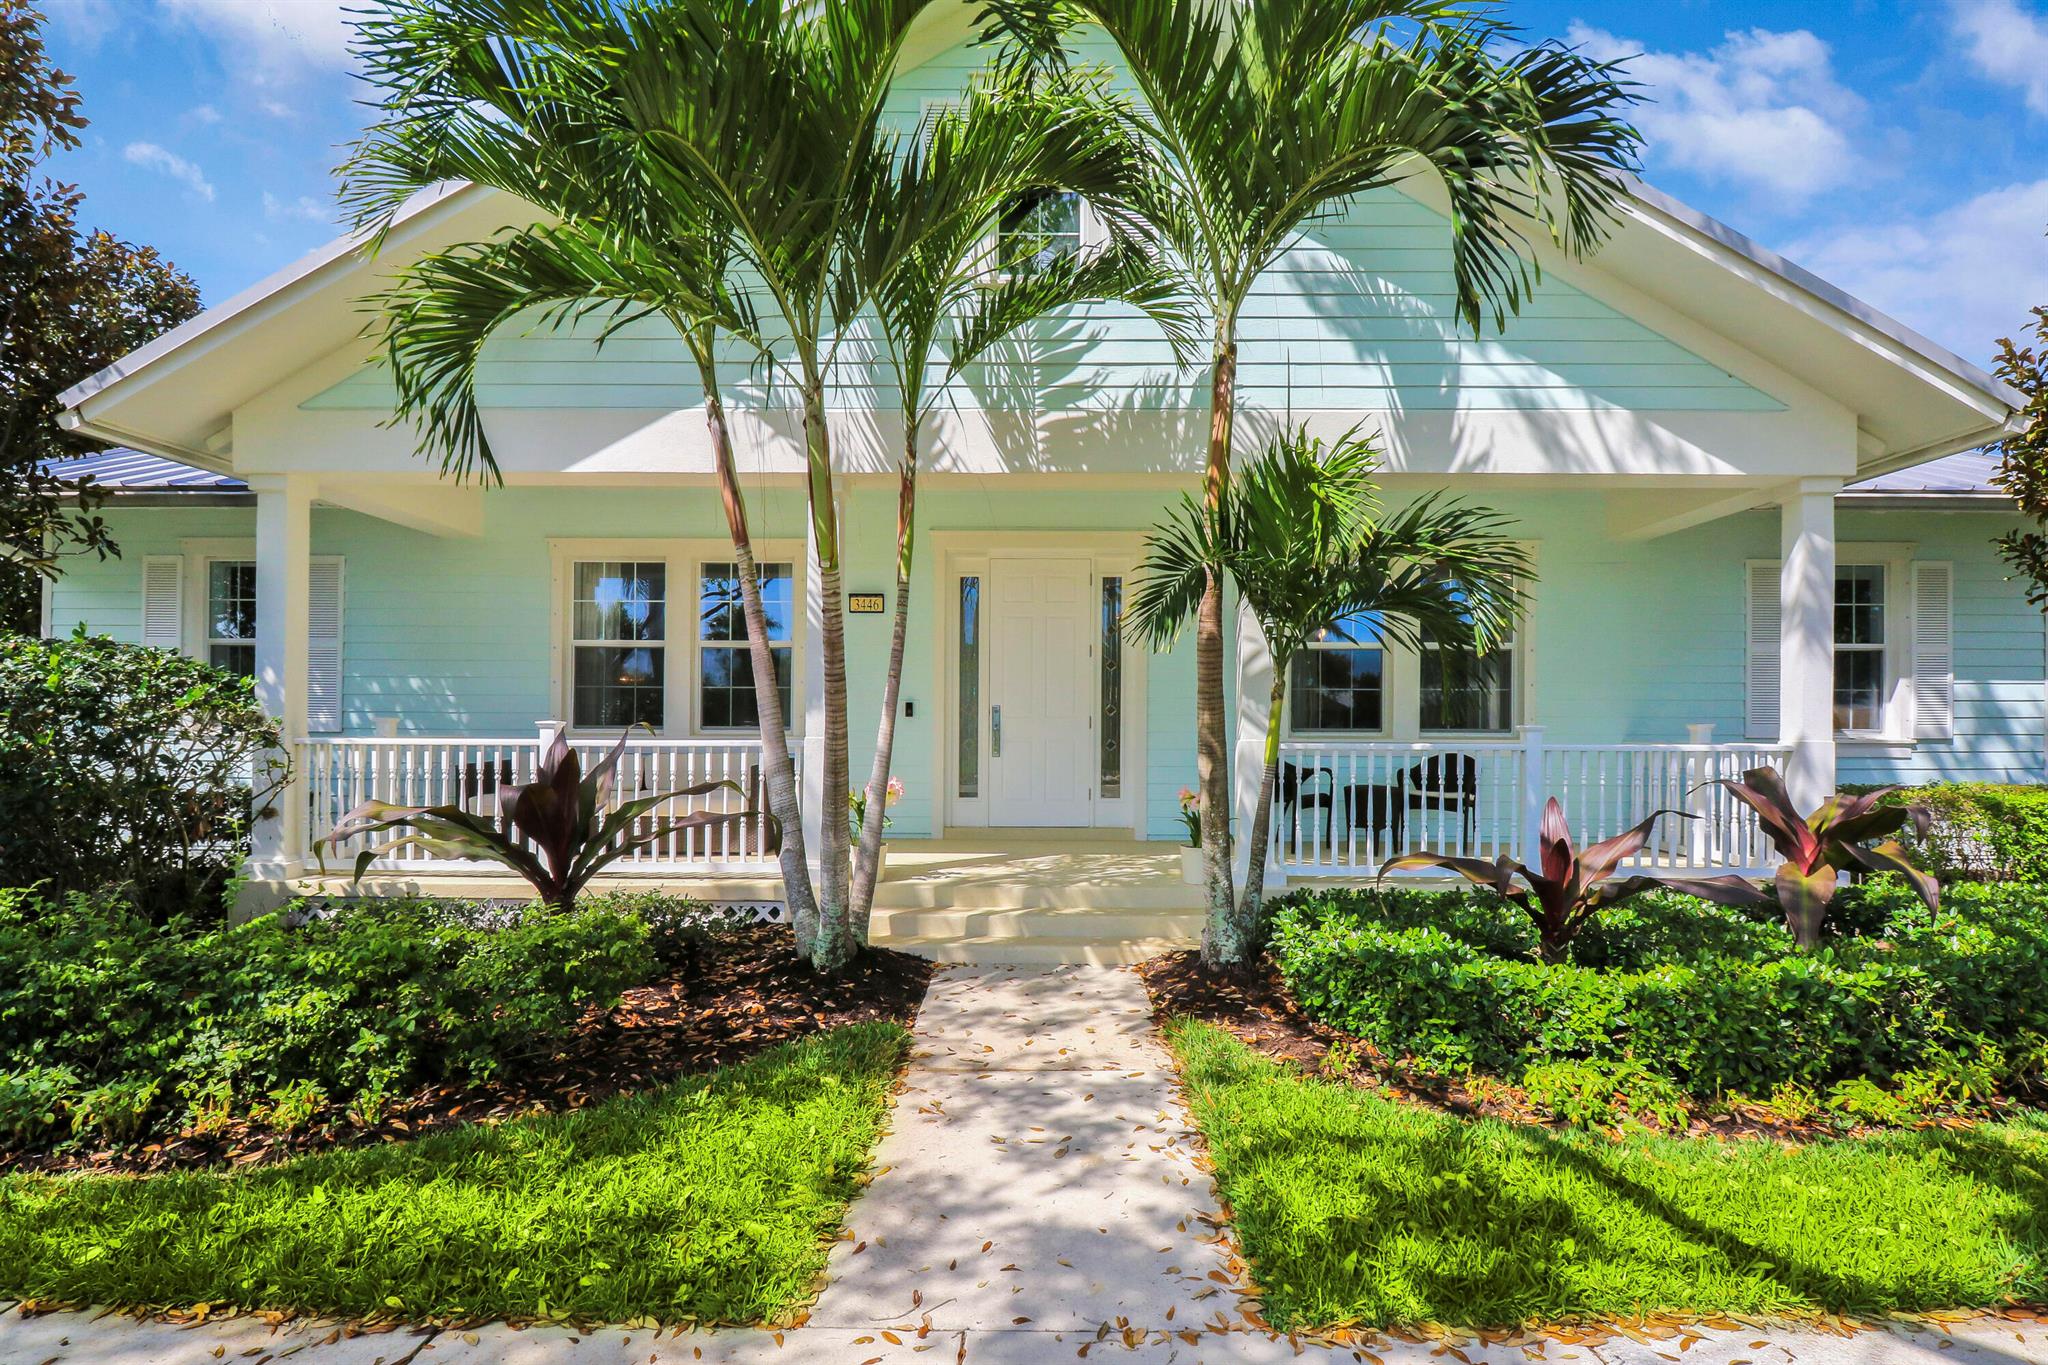 Indulge in the ultimate blend of charm and convenience in the highly sought after Key West community of Mallory Creek in Abacoa. This stunning home flooded with natural light boasts 5 bedrooms, 4 bathrooms all on one level, hard wood flooring, newer appliances and an inviting tranquil lake view from your front porch. The fifth bedroom offers a private suite with a separate entrance, perfect for guests or as a separate office. Residents enjoy access to premier amenities including 2 heated pools, a gym, billiards room and clubhouse. Embrace the quintessential Florida lifestyle in this exceptional residence all within a stones throw of Abacoa's boutique shops, restaurants, live entertainment, Roger Dean Stadium, pristine Jupiter Beach, Jupiter A rated school district and much more.